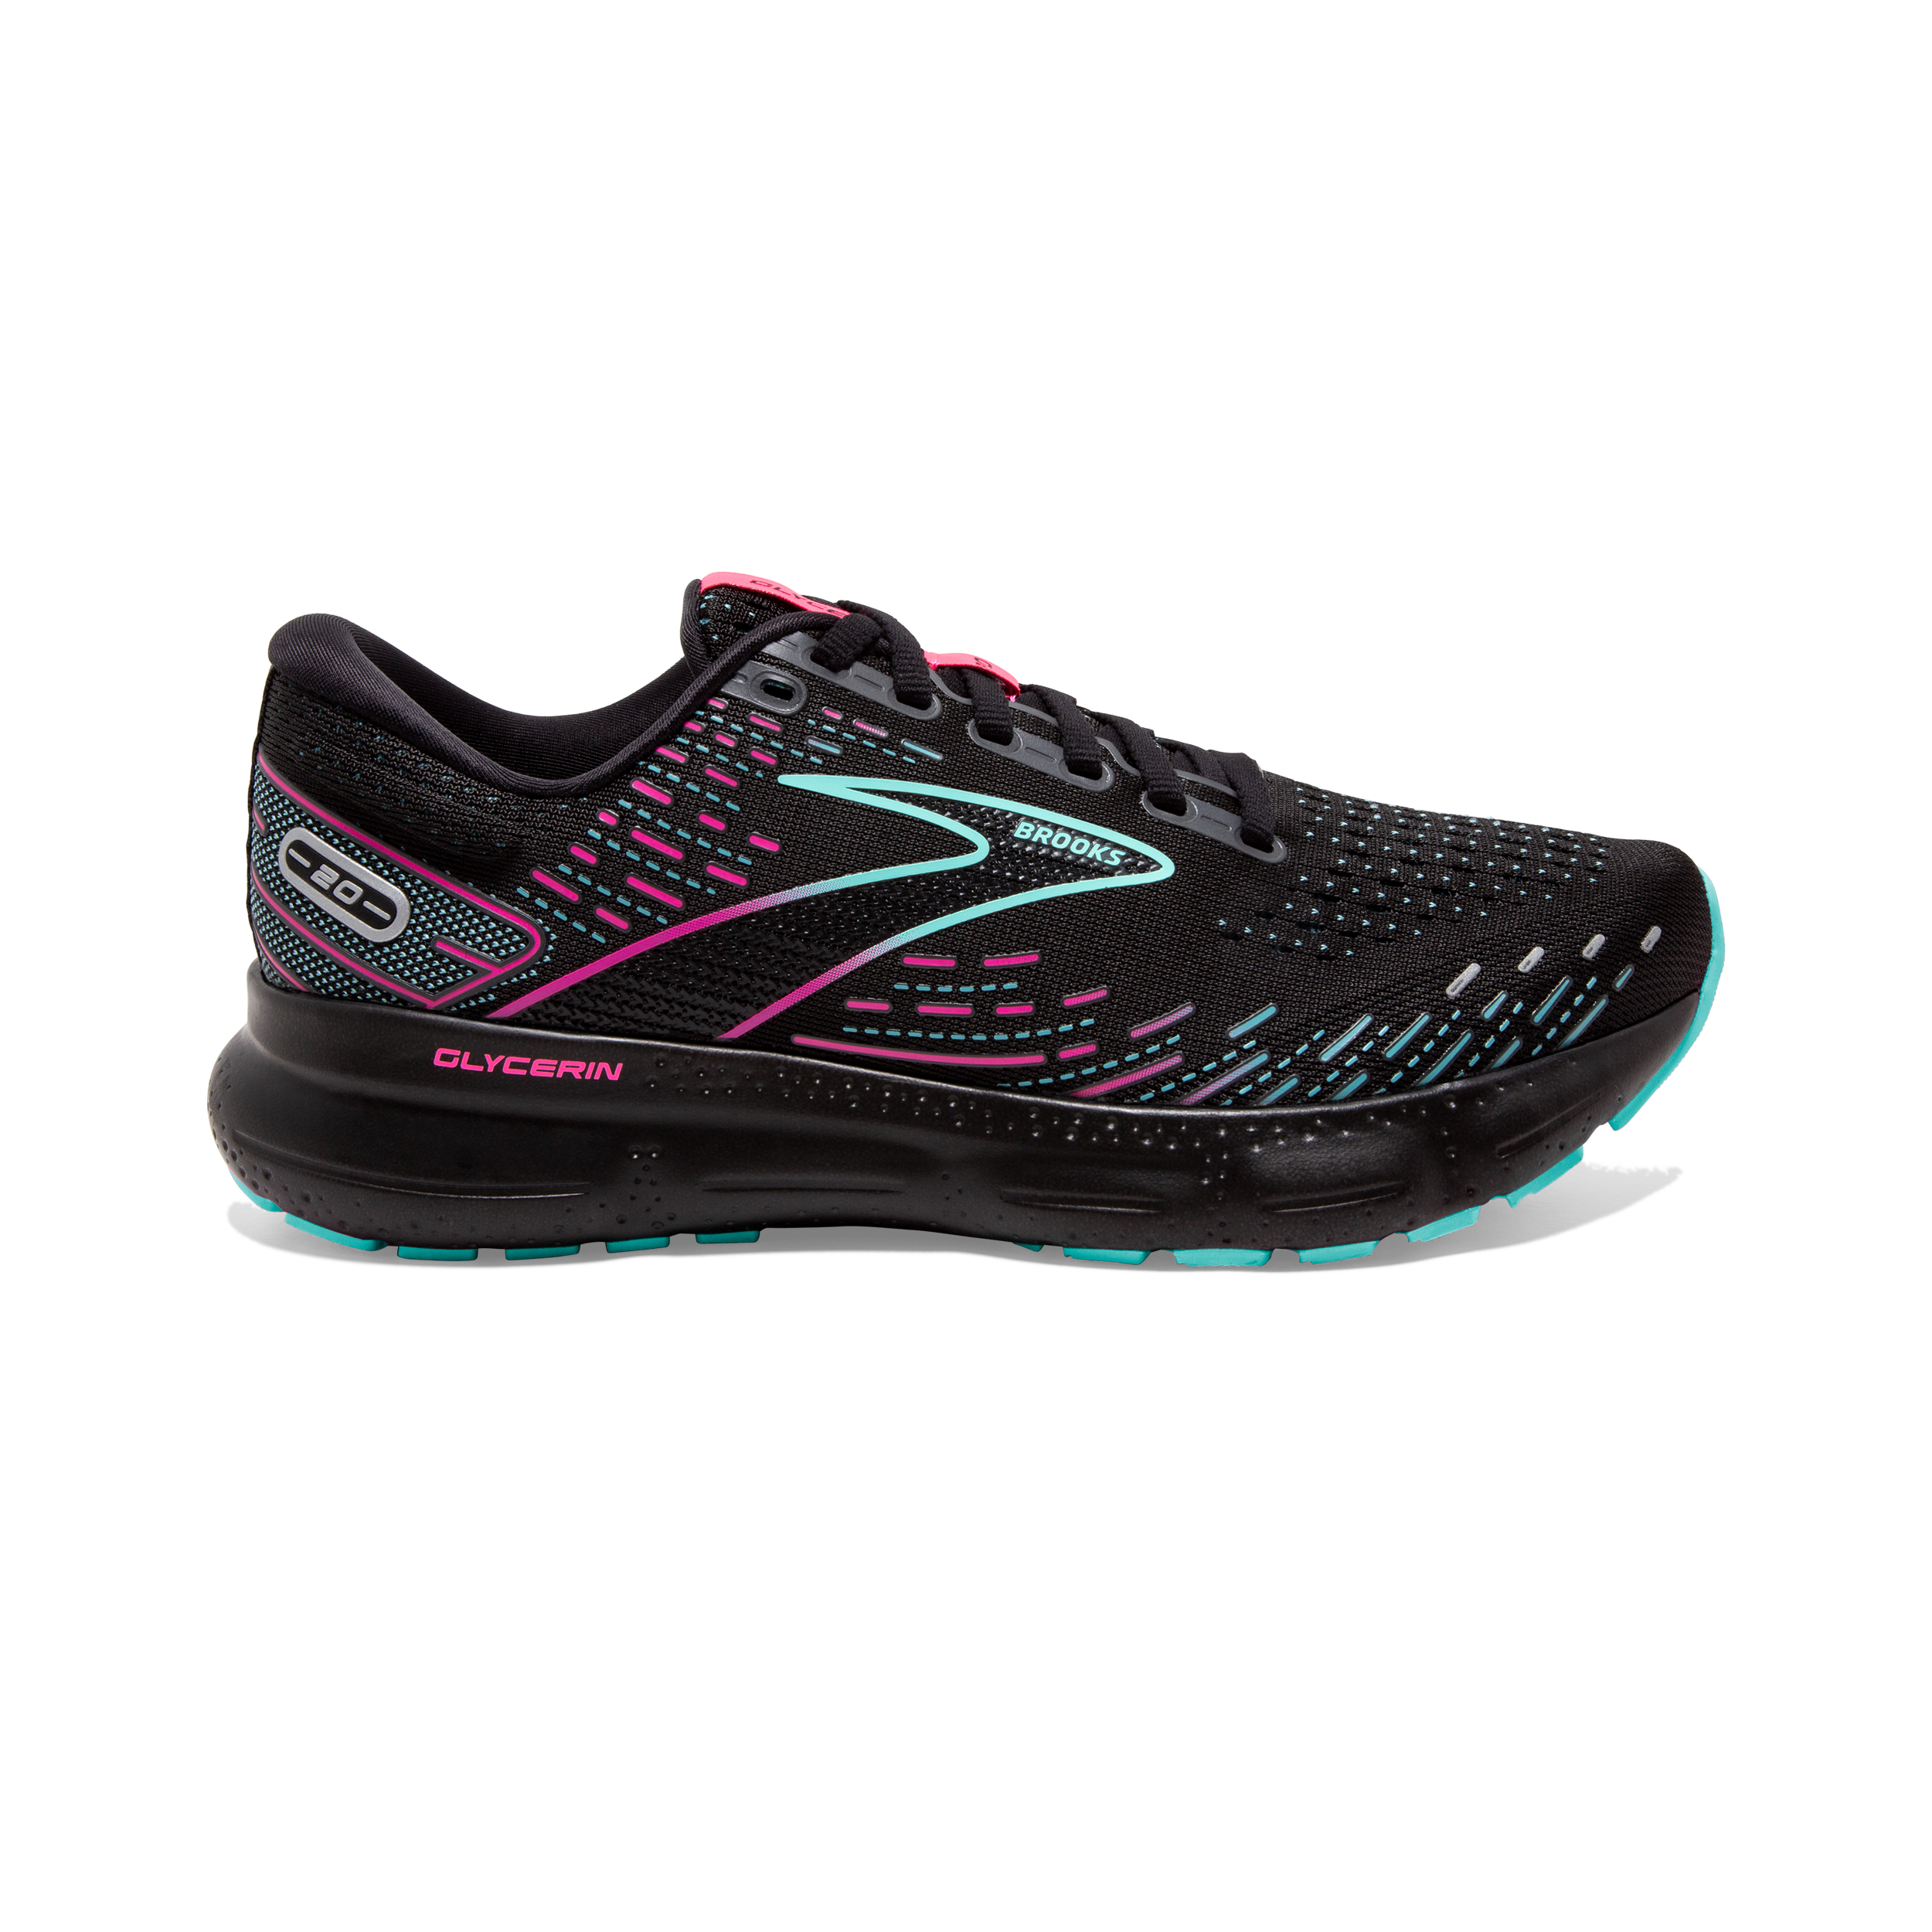 Where to Buy Brooks Glycerin Running Shoes?